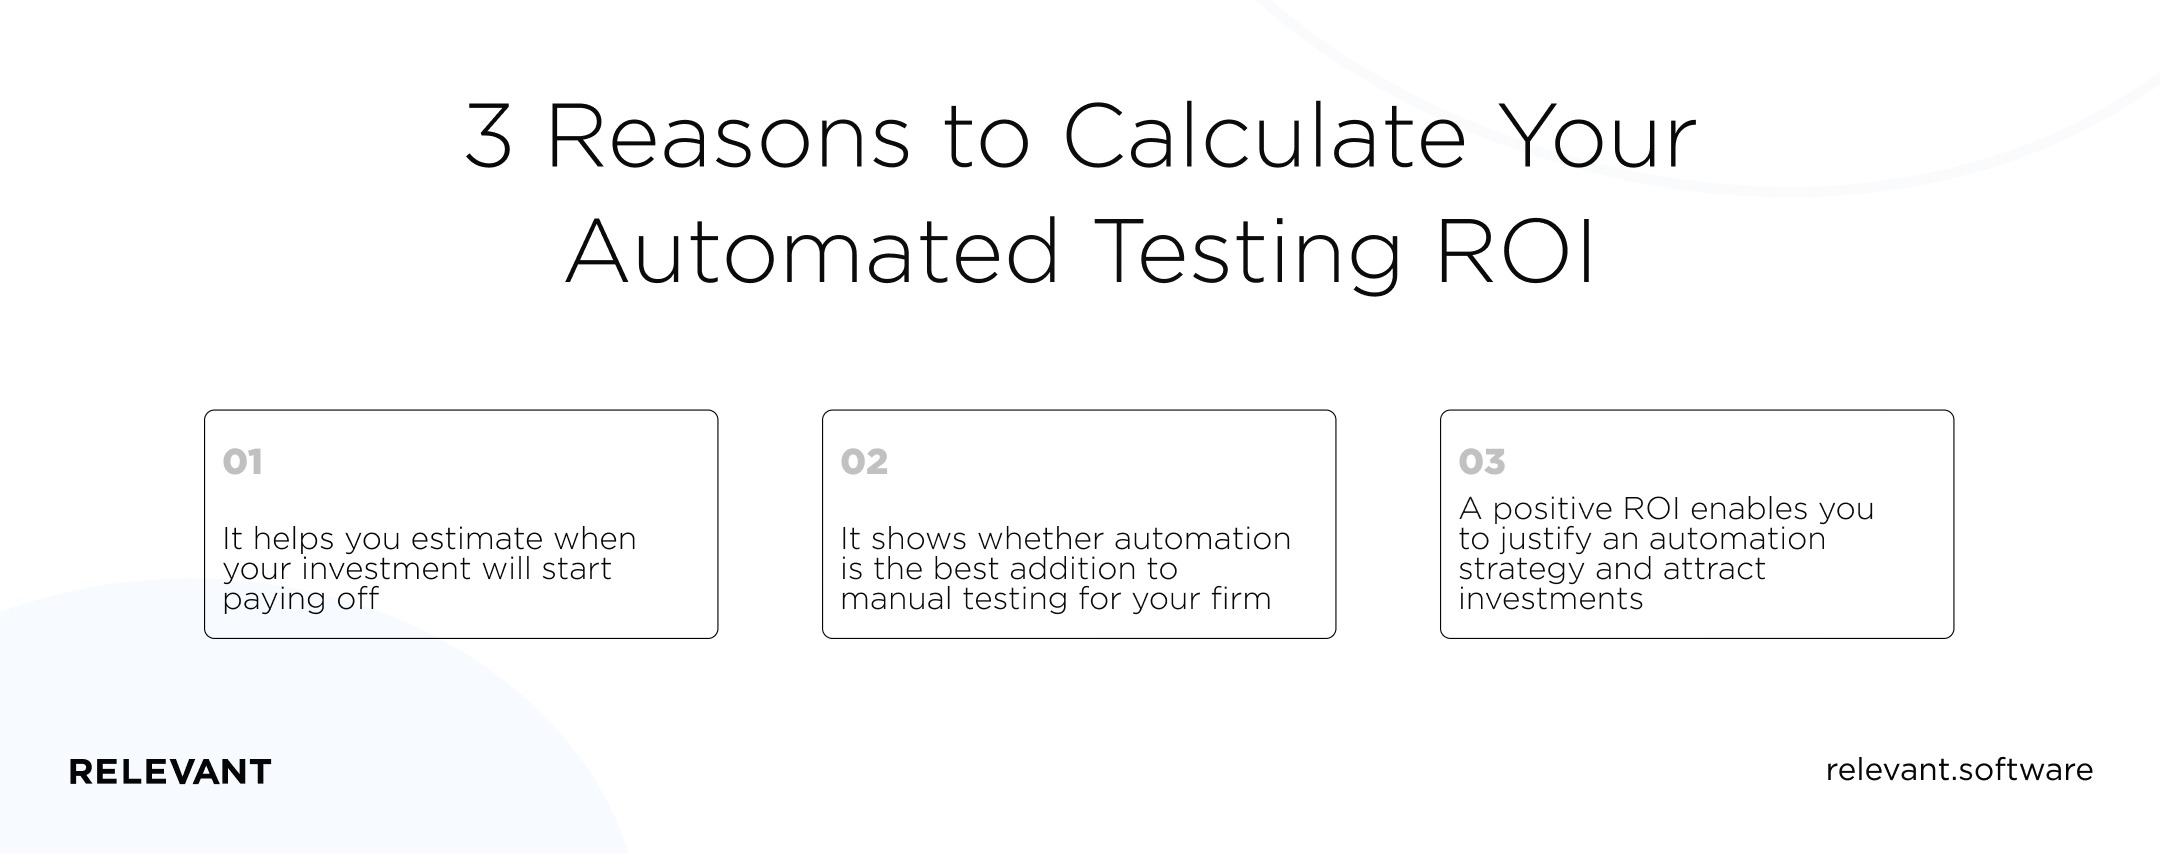 3 Reasons to Calculate Your Automated Testing ROI